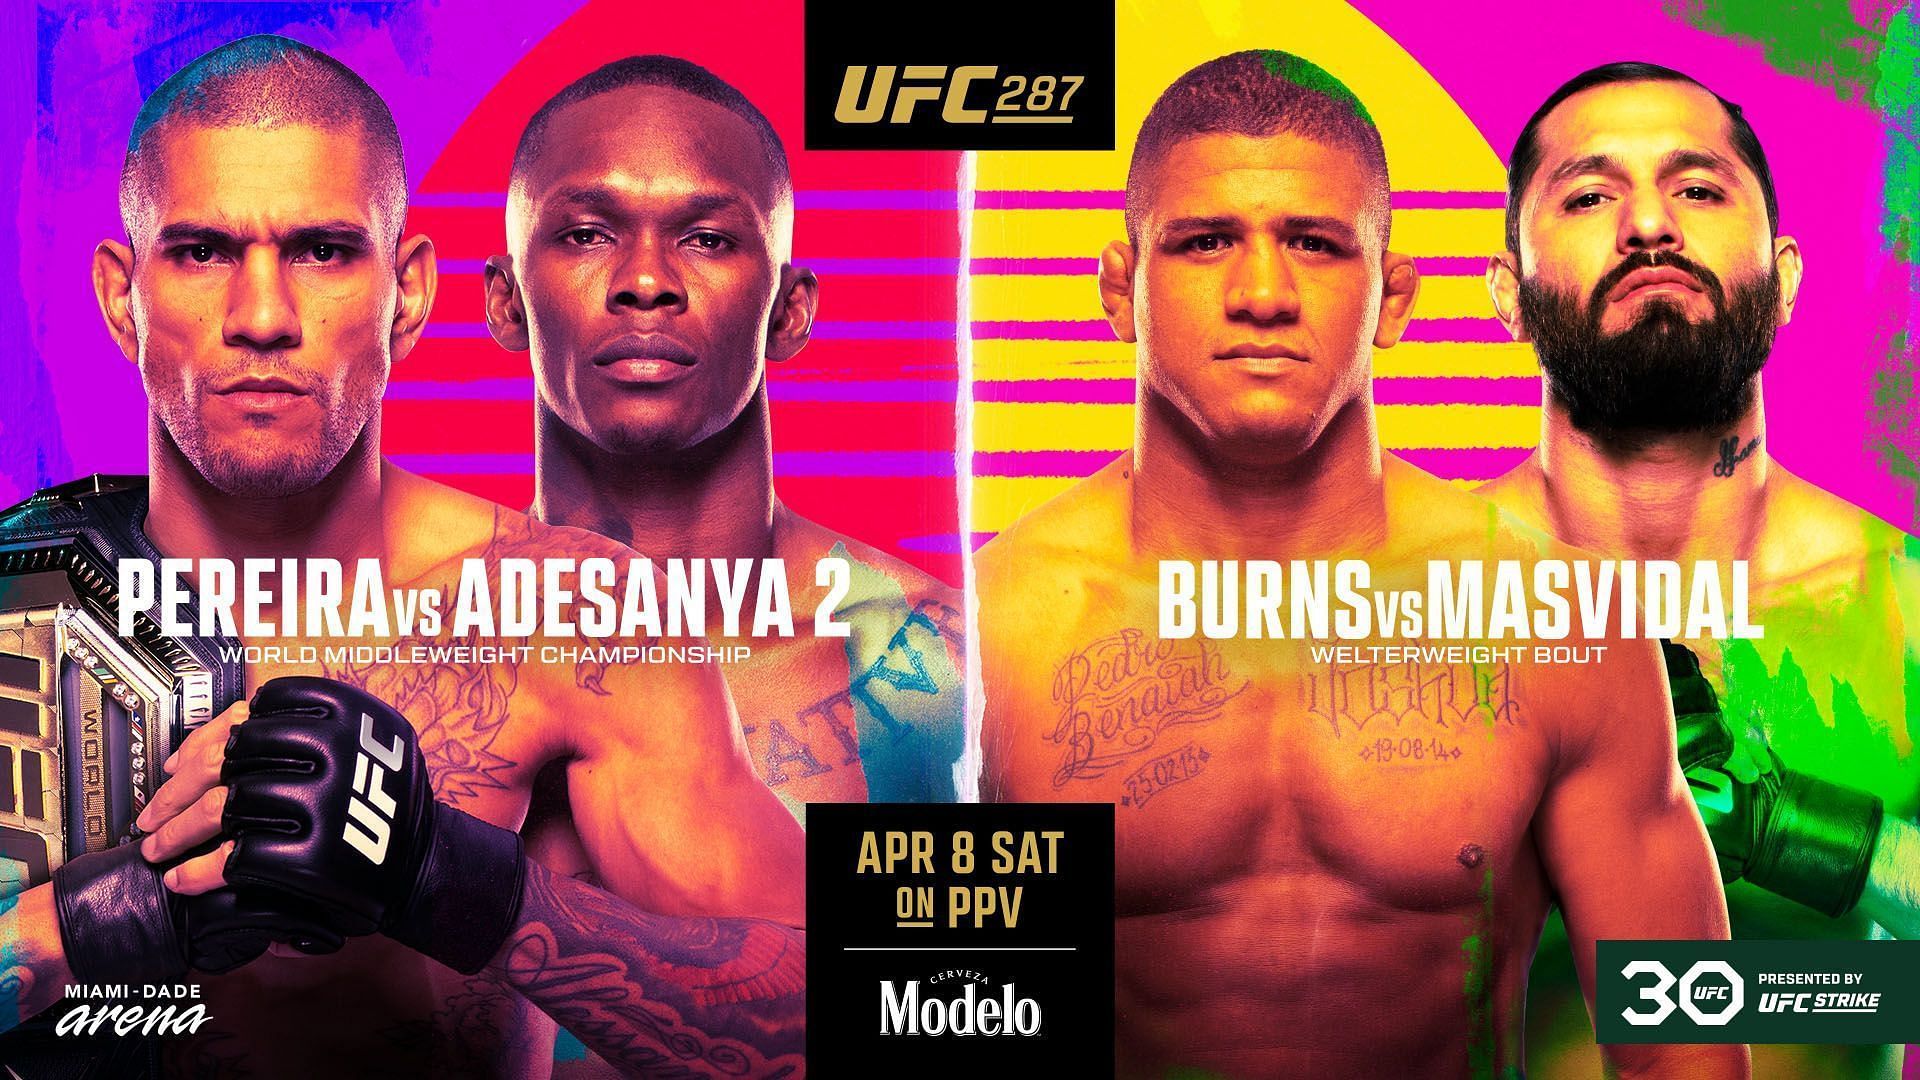 UFC 293: “Chinese from the waist down” - Israel Adesanya rocks red shorts  for UFC 293 media day photoshoot, triggers 'Chinese' hysteria among MMA fans